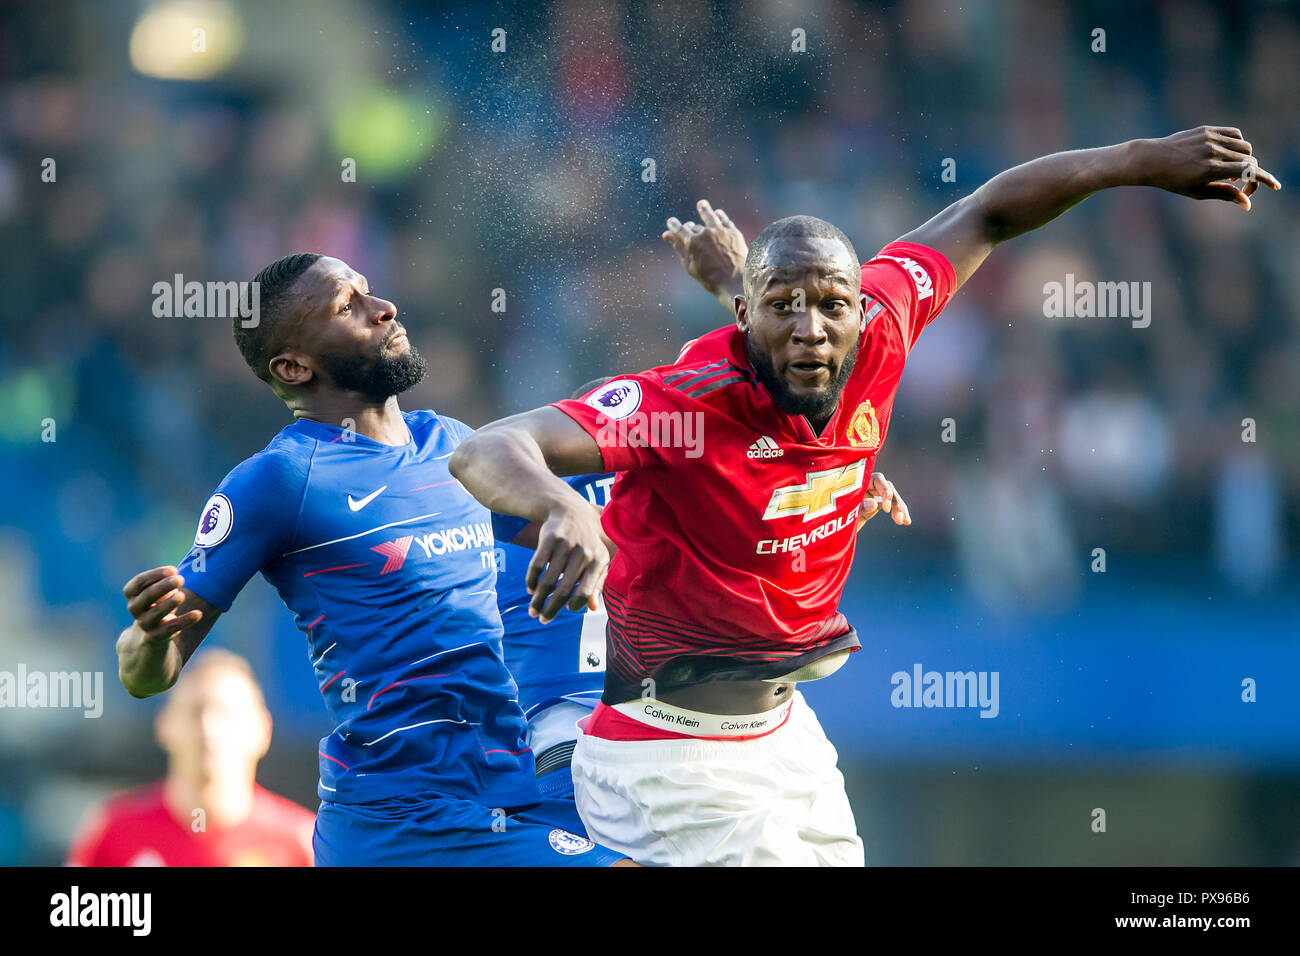 London, UK. 20th Oct, 2018. Romelu Lukaku of Manchester United and Antonio  RÃ¼diger of Chelsea during the Premier League match between Chelsea and  Manchester United at Stamford Bridge, London, England on 20